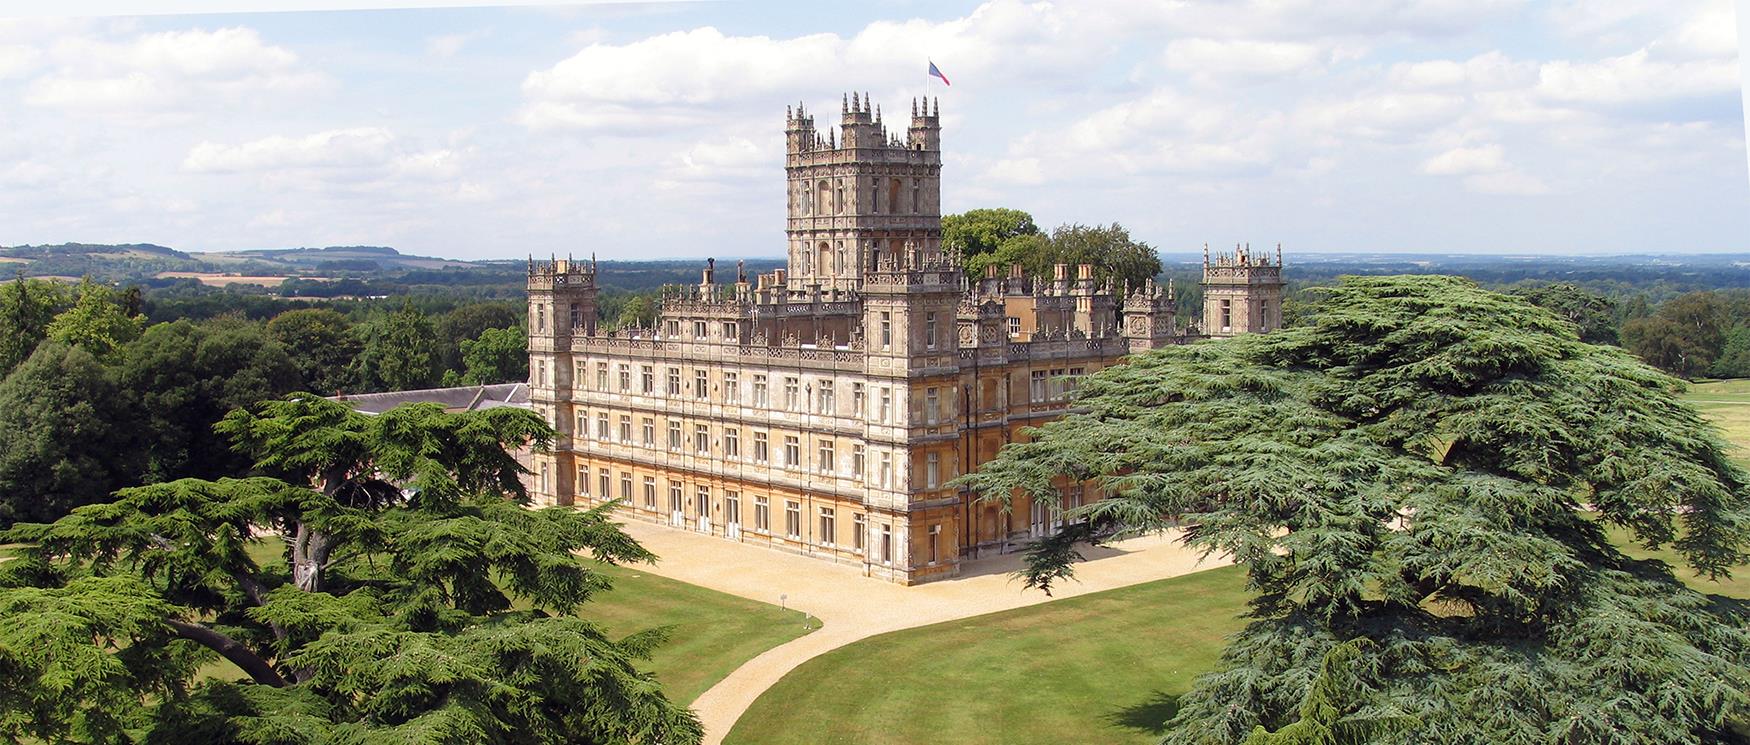 Highclere Castle Location for Downton Abbey